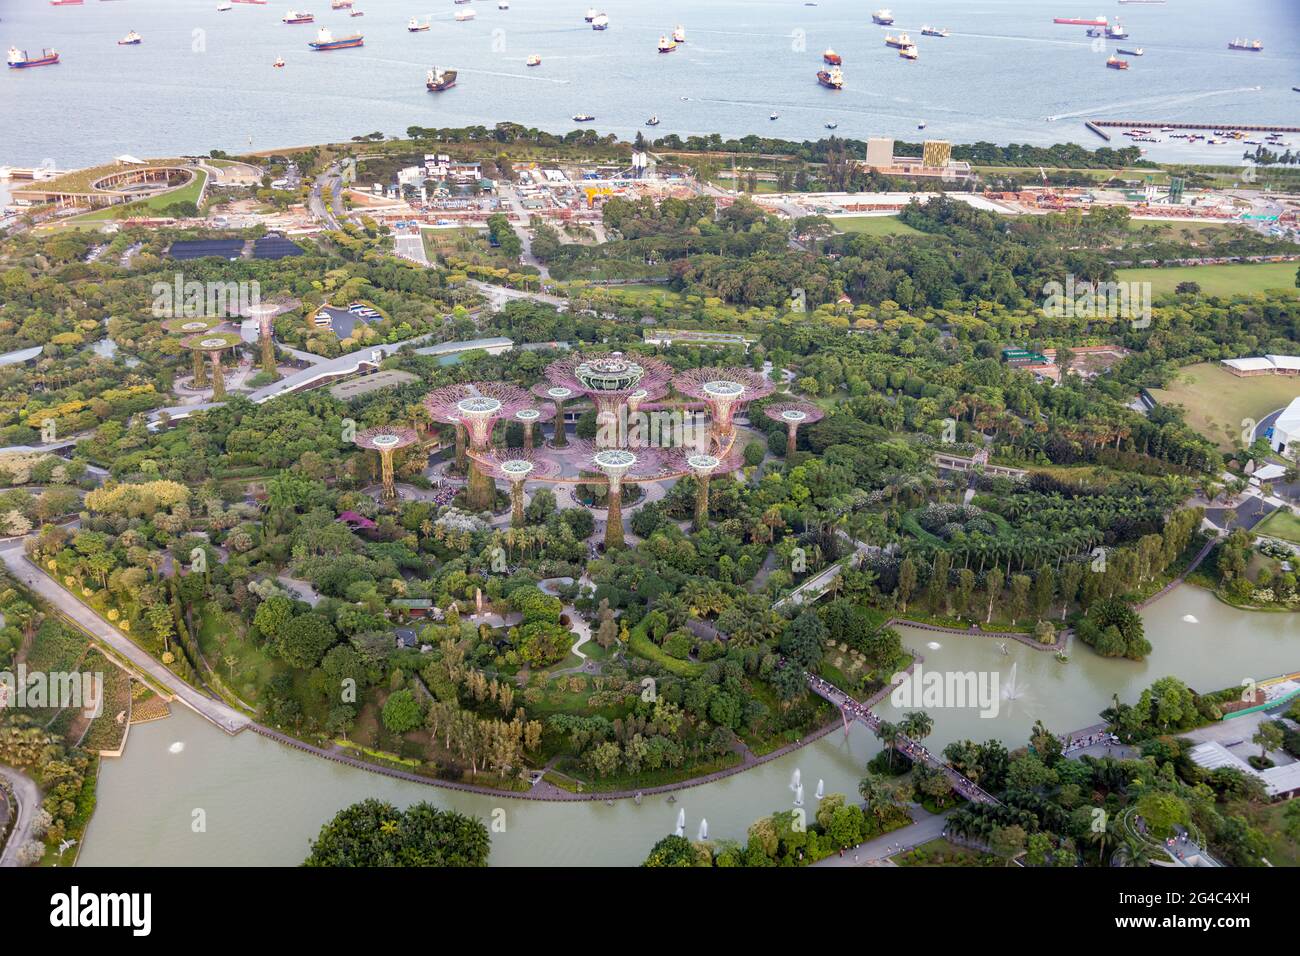 Aerial view of the Gardens by the Bay in Singapore, featuring the Supertree Grove. Stock Photo